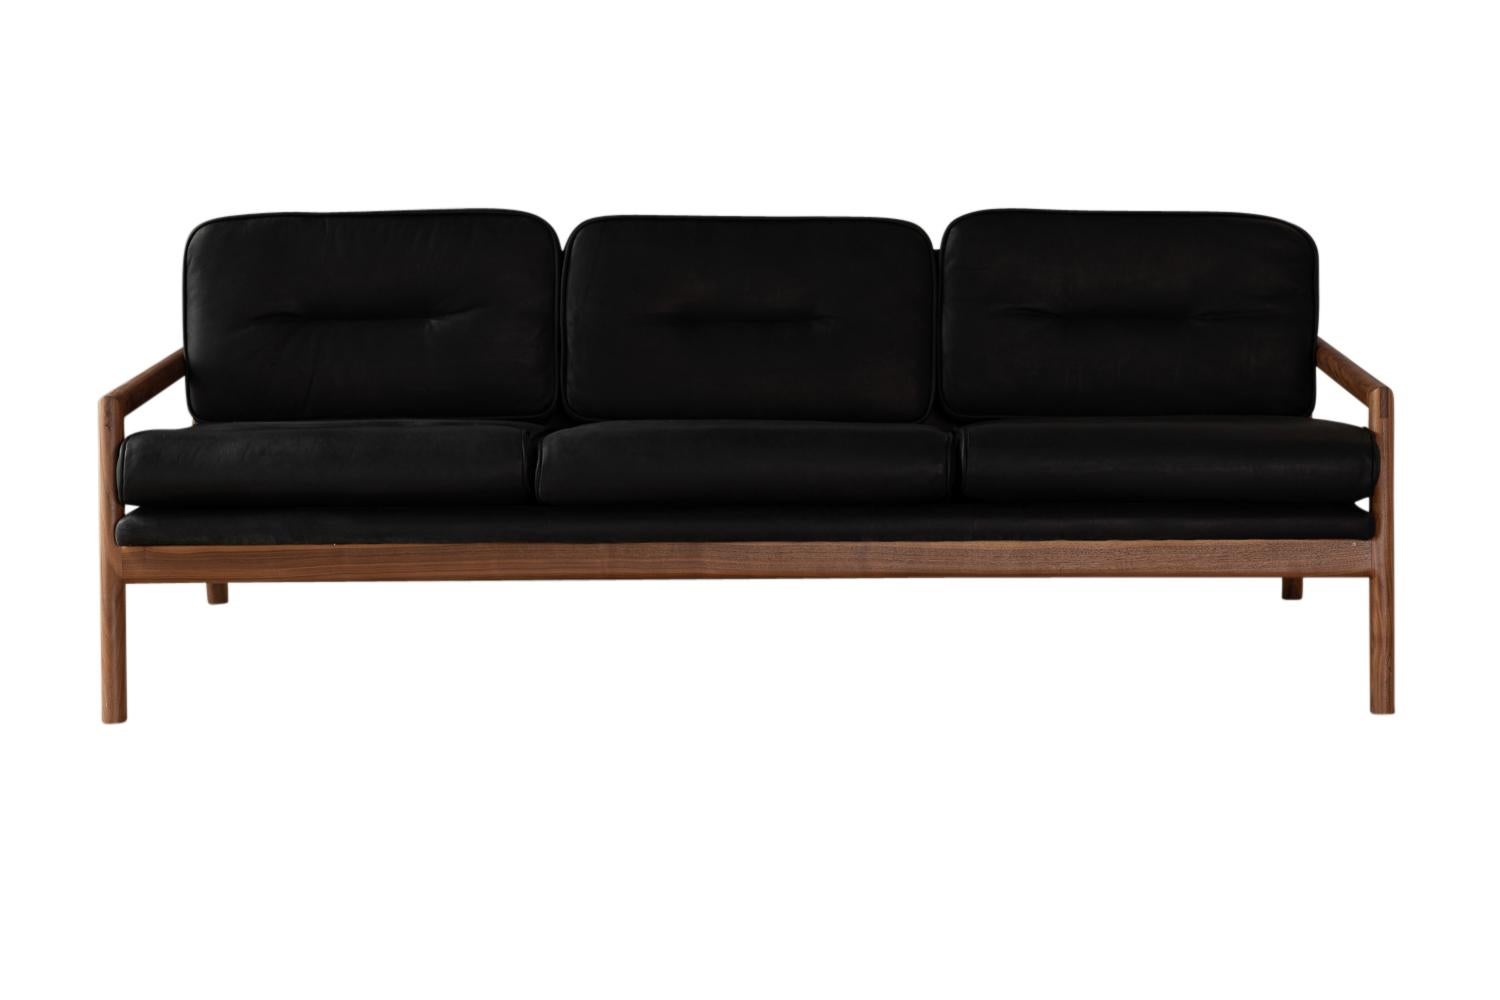 This handmade solid wood constructed sofa includes hand-cut joinery and custom upholtered seat and seat back cushions.

This sofa is shown in black leather with ebonized oak.
Most Maharam upholstery fabrics have been pre-approved.
COM and COL